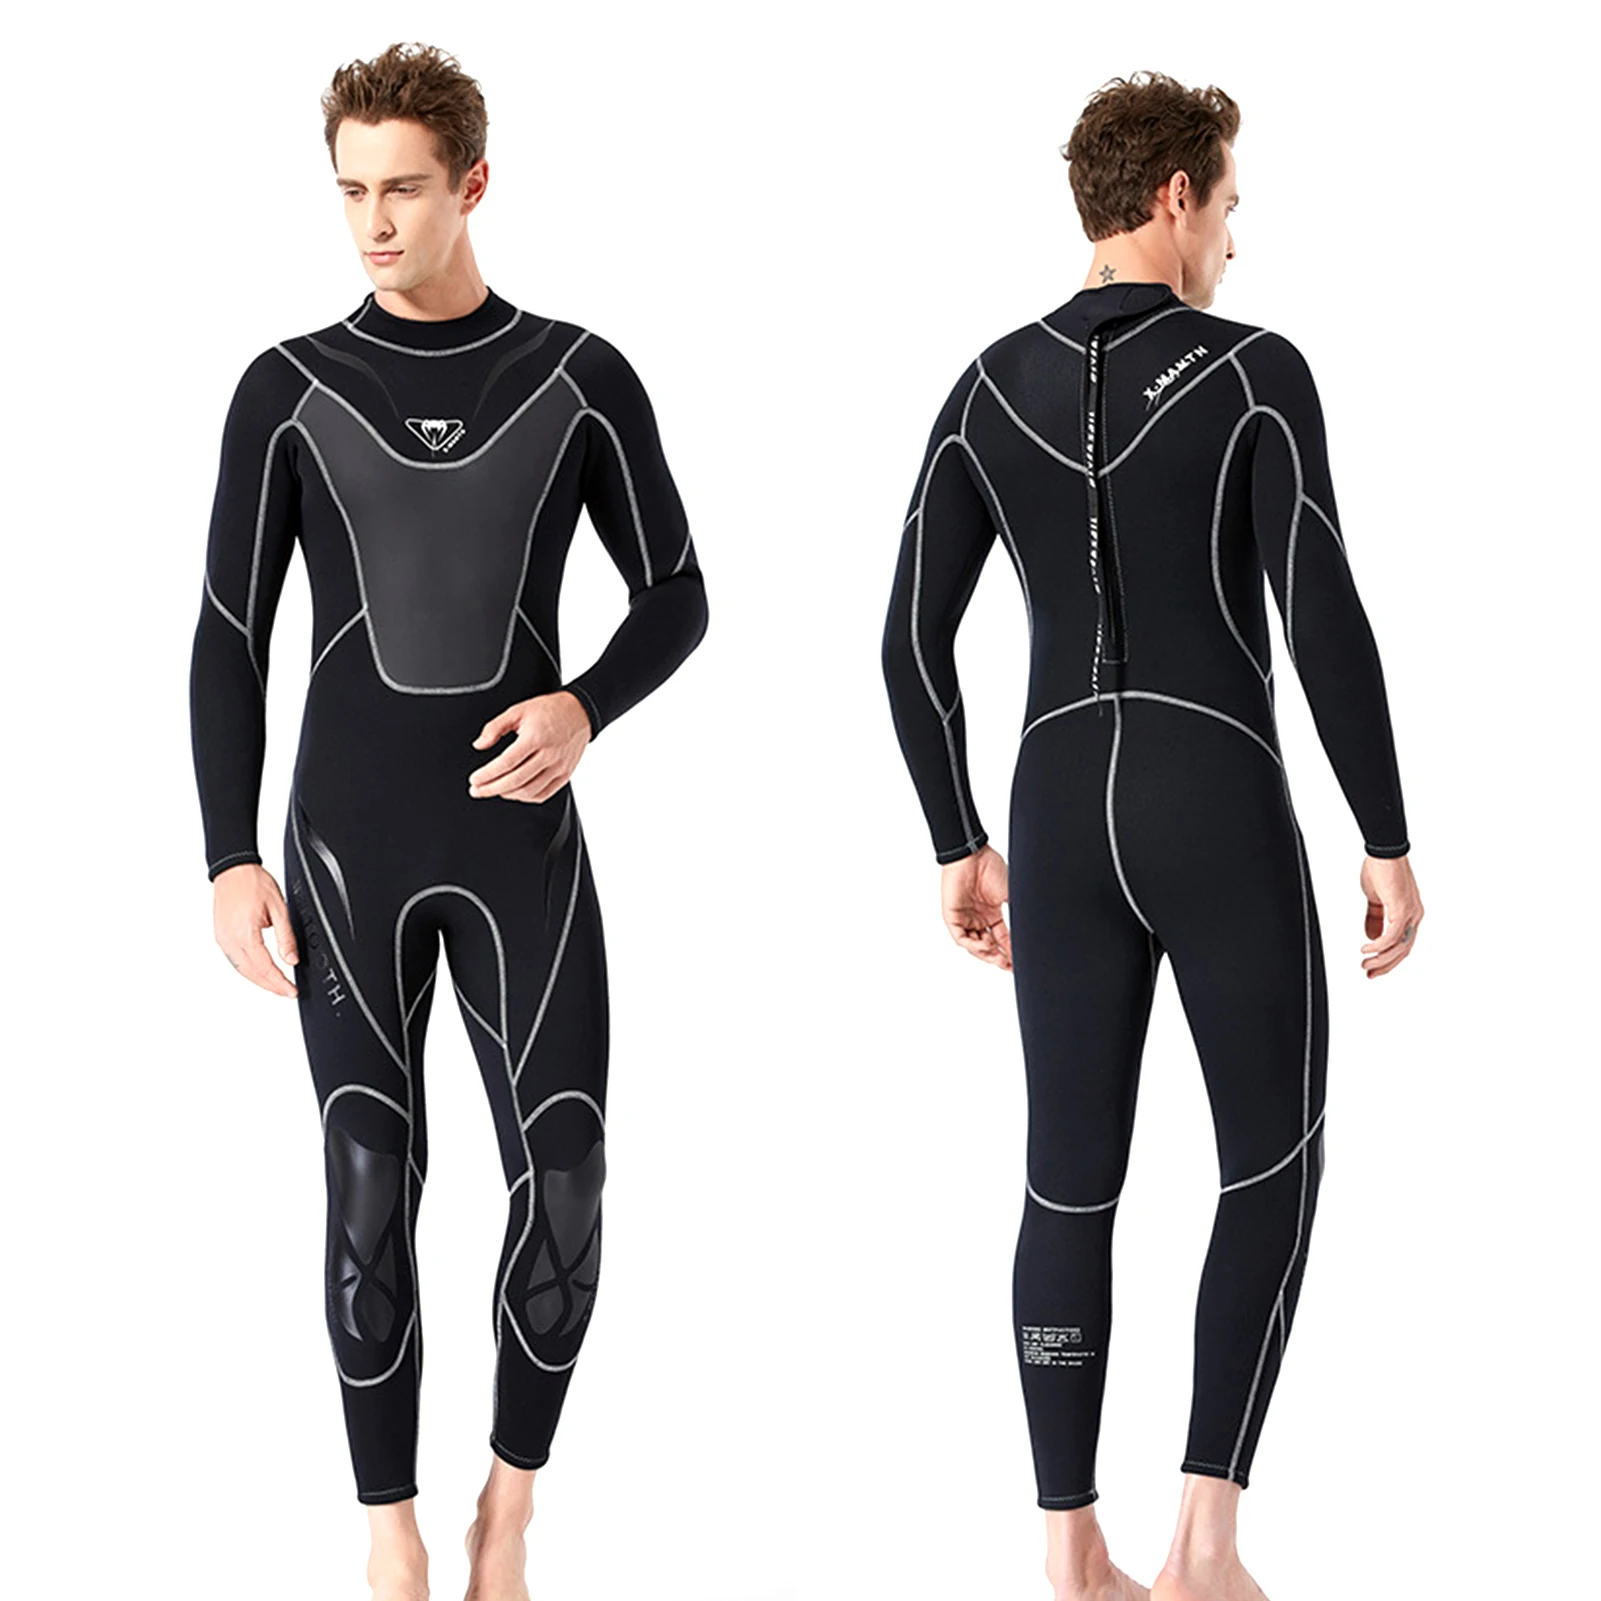 

Swimming Wetsuit Men 3mm Neoprene Full-body Wetsuit with Back Zipper Diving Suit For Surfing Scuba Snorkeling Water Sports